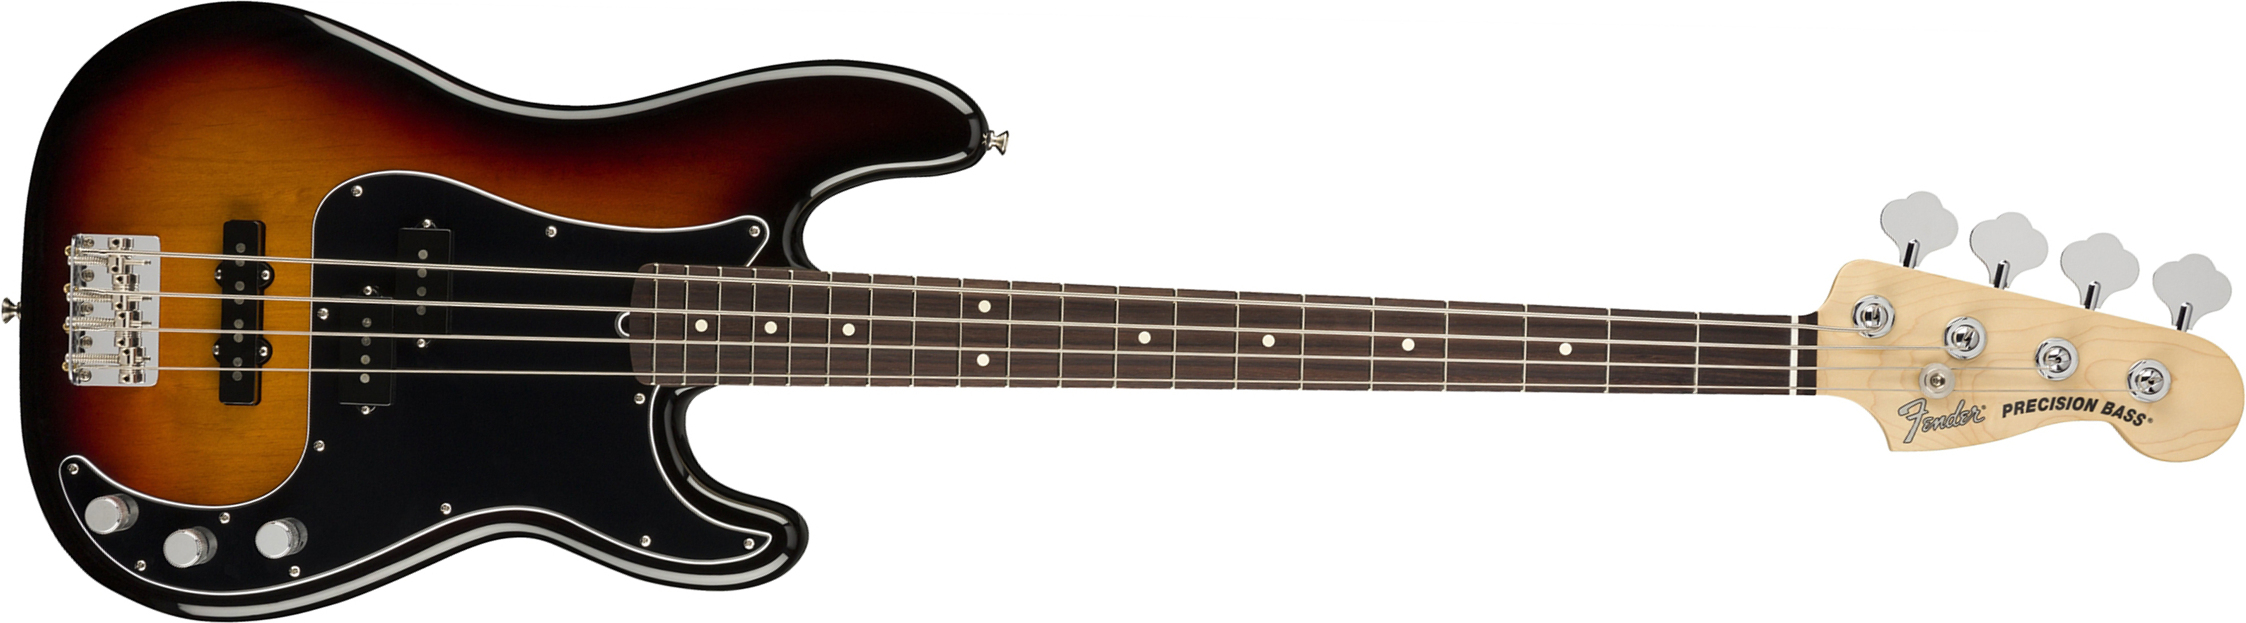 Fender Precision Bass American Performer Usa Rw - 3-color Sunburst - Solid body electric bass - Main picture